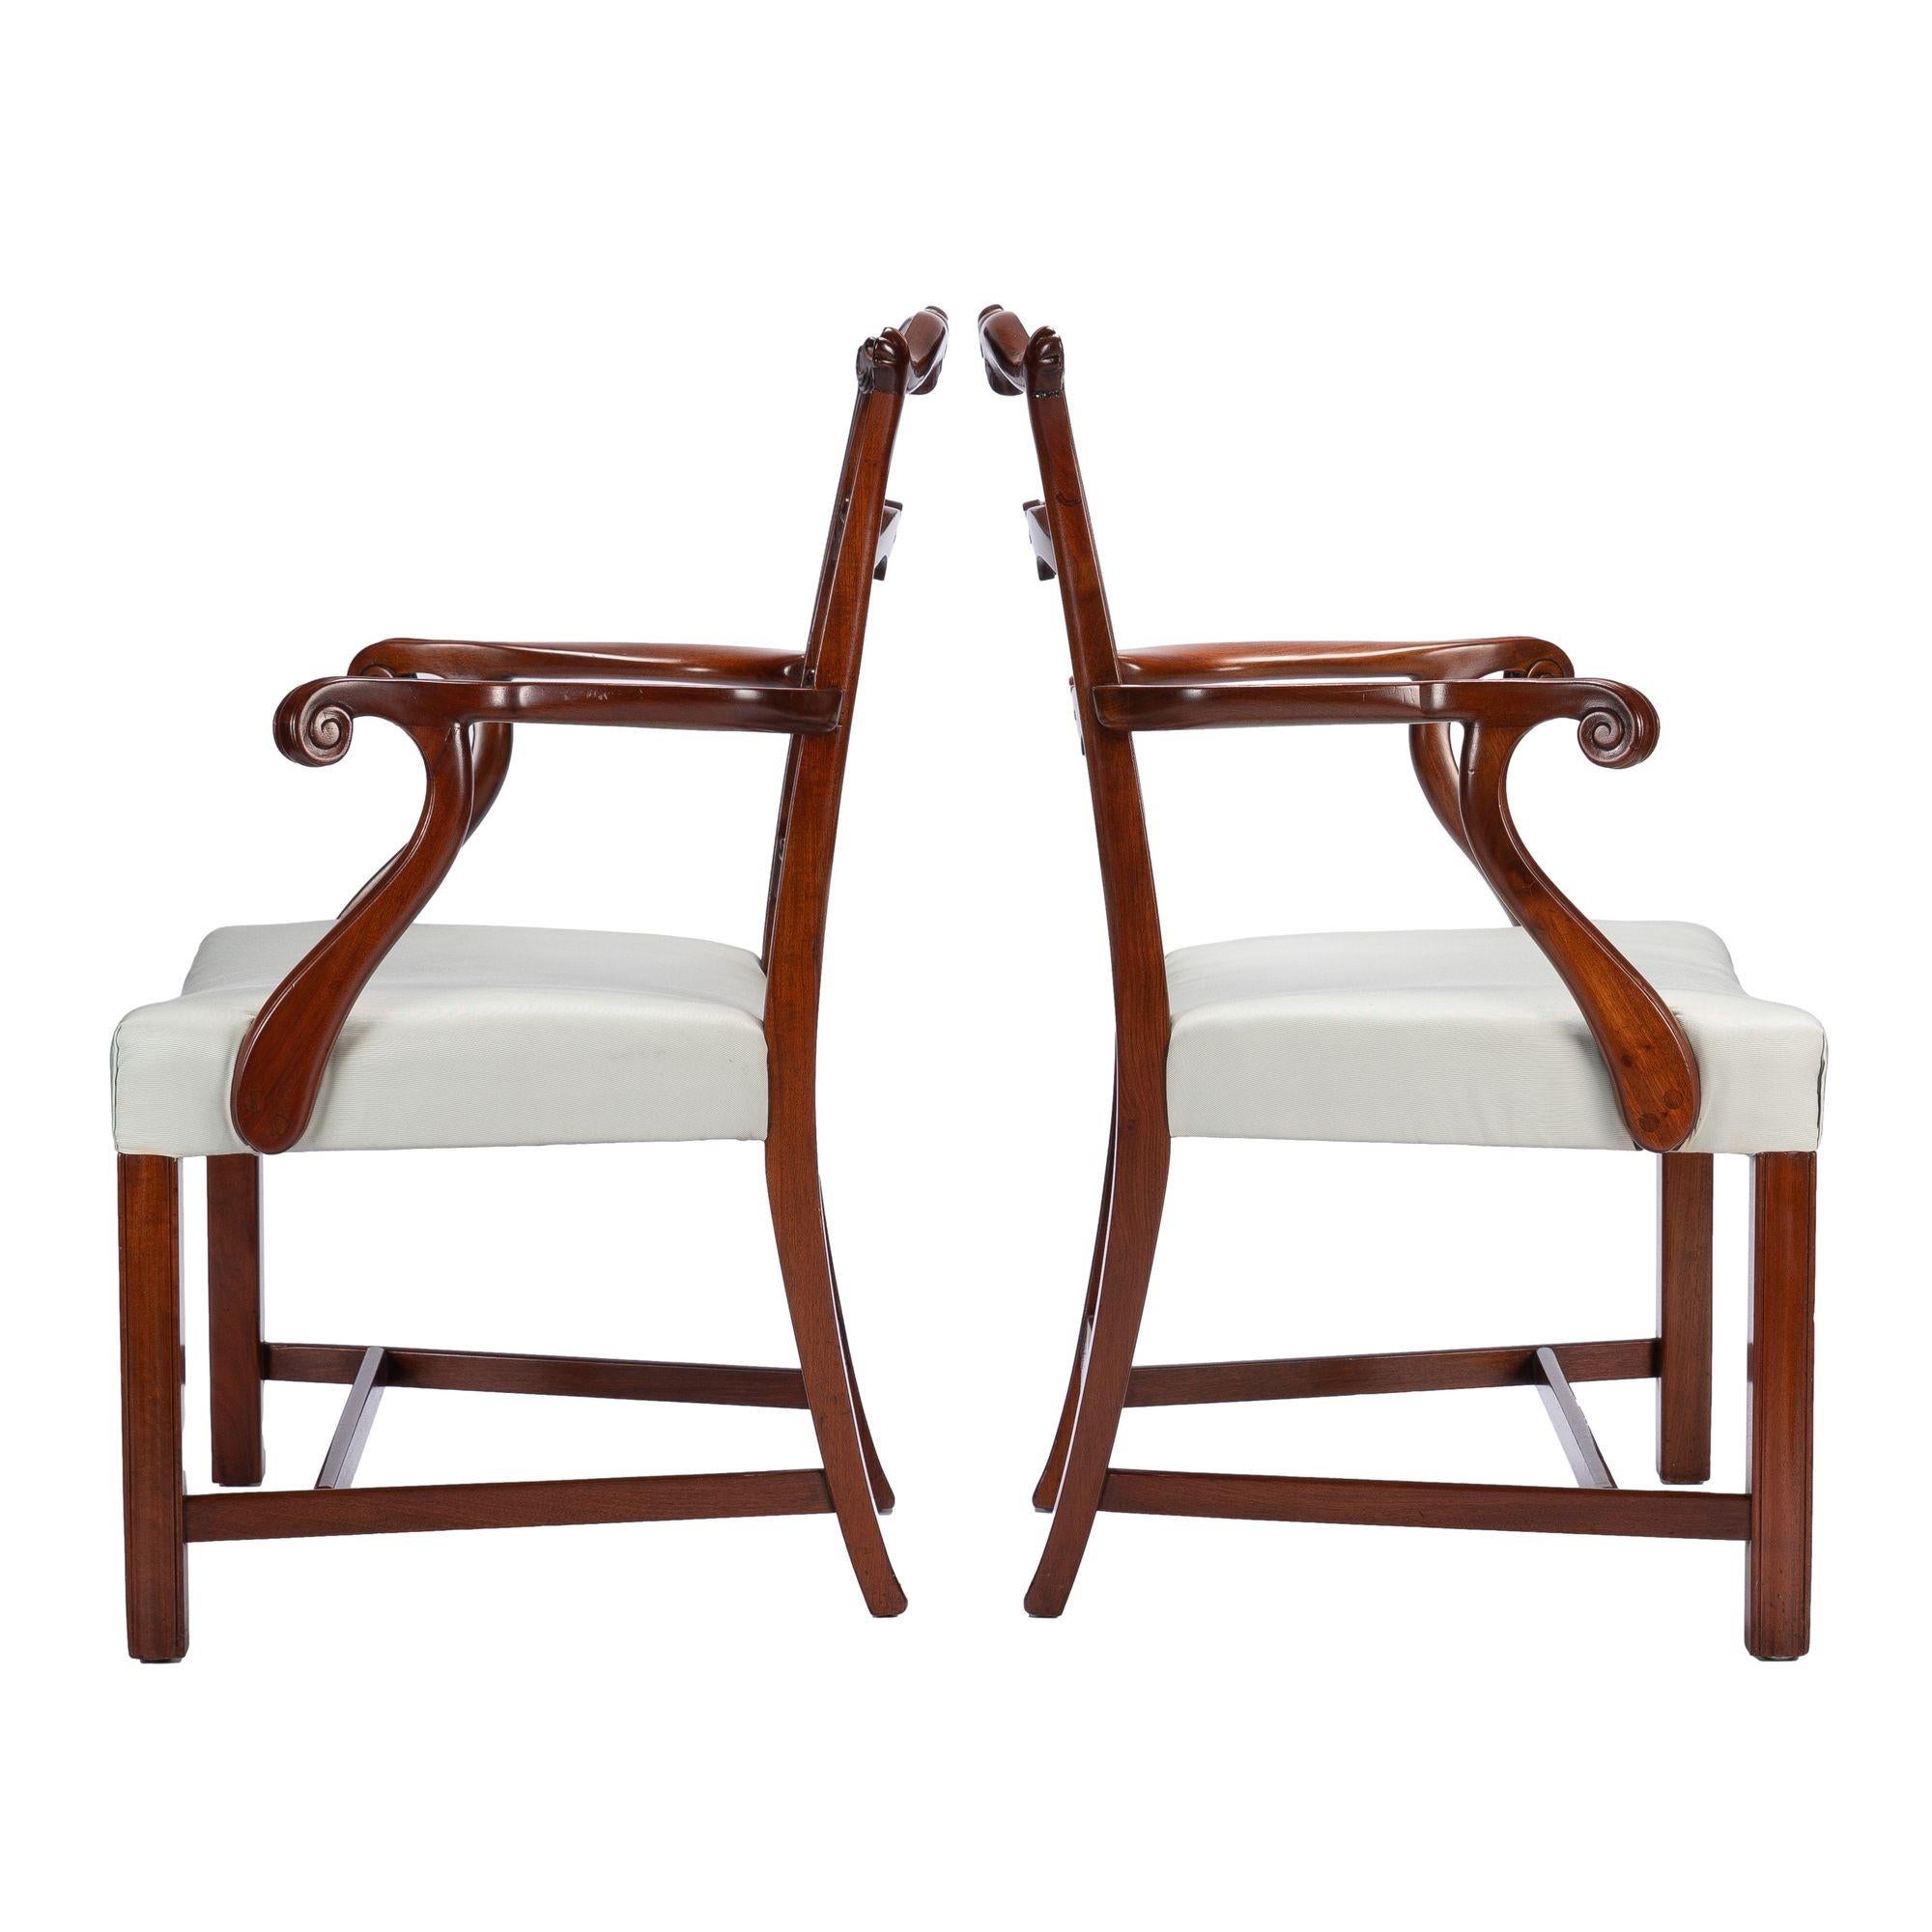 Pair of Chippendale style ladder back arm chairs, c. 1930-40 For Sale 1